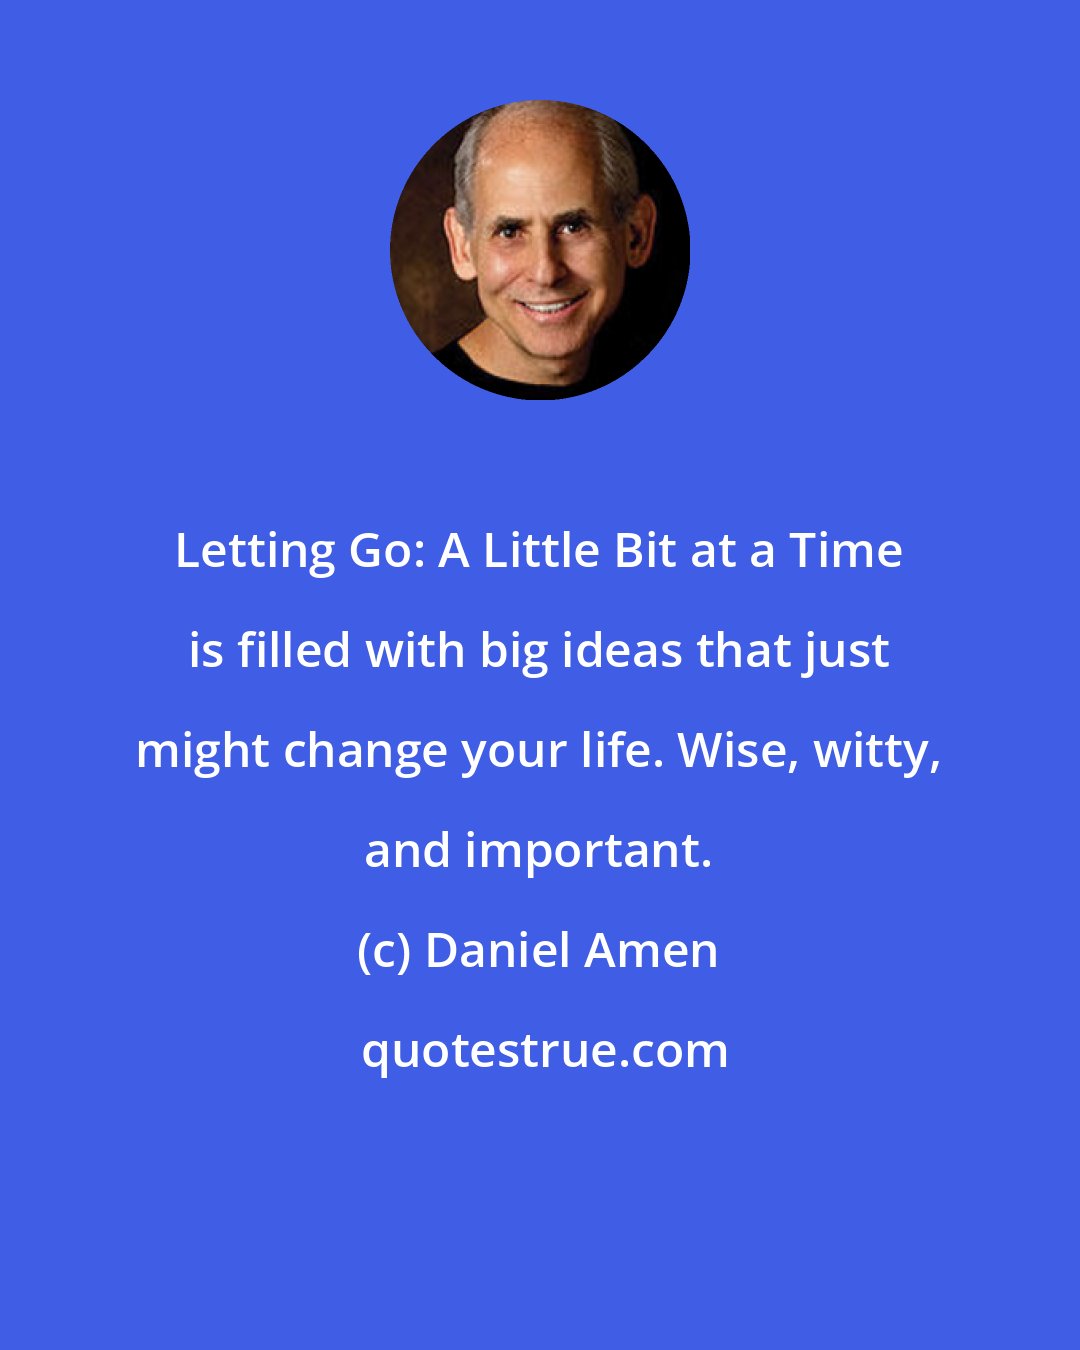 Daniel Amen: Letting Go: A Little Bit at a Time is filled with big ideas that just might change your life. Wise, witty, and important.